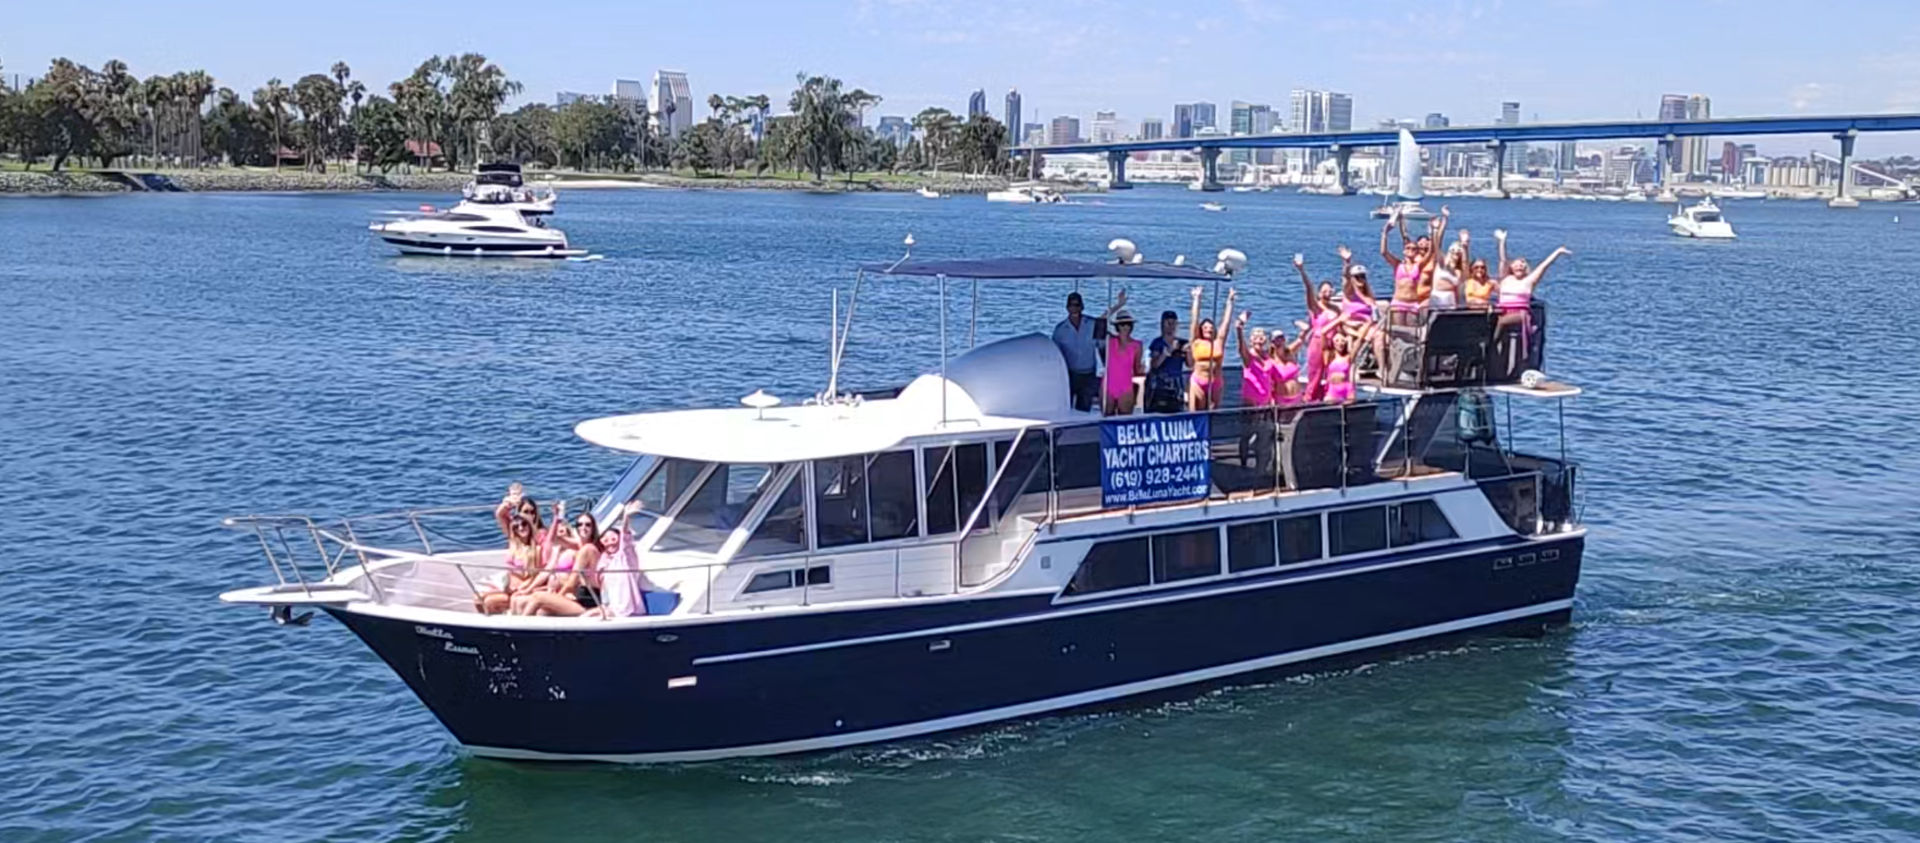 50' House Party Yacht: Best Lighting & Sound System in San Diego (Up to 40 Passengers) image 1